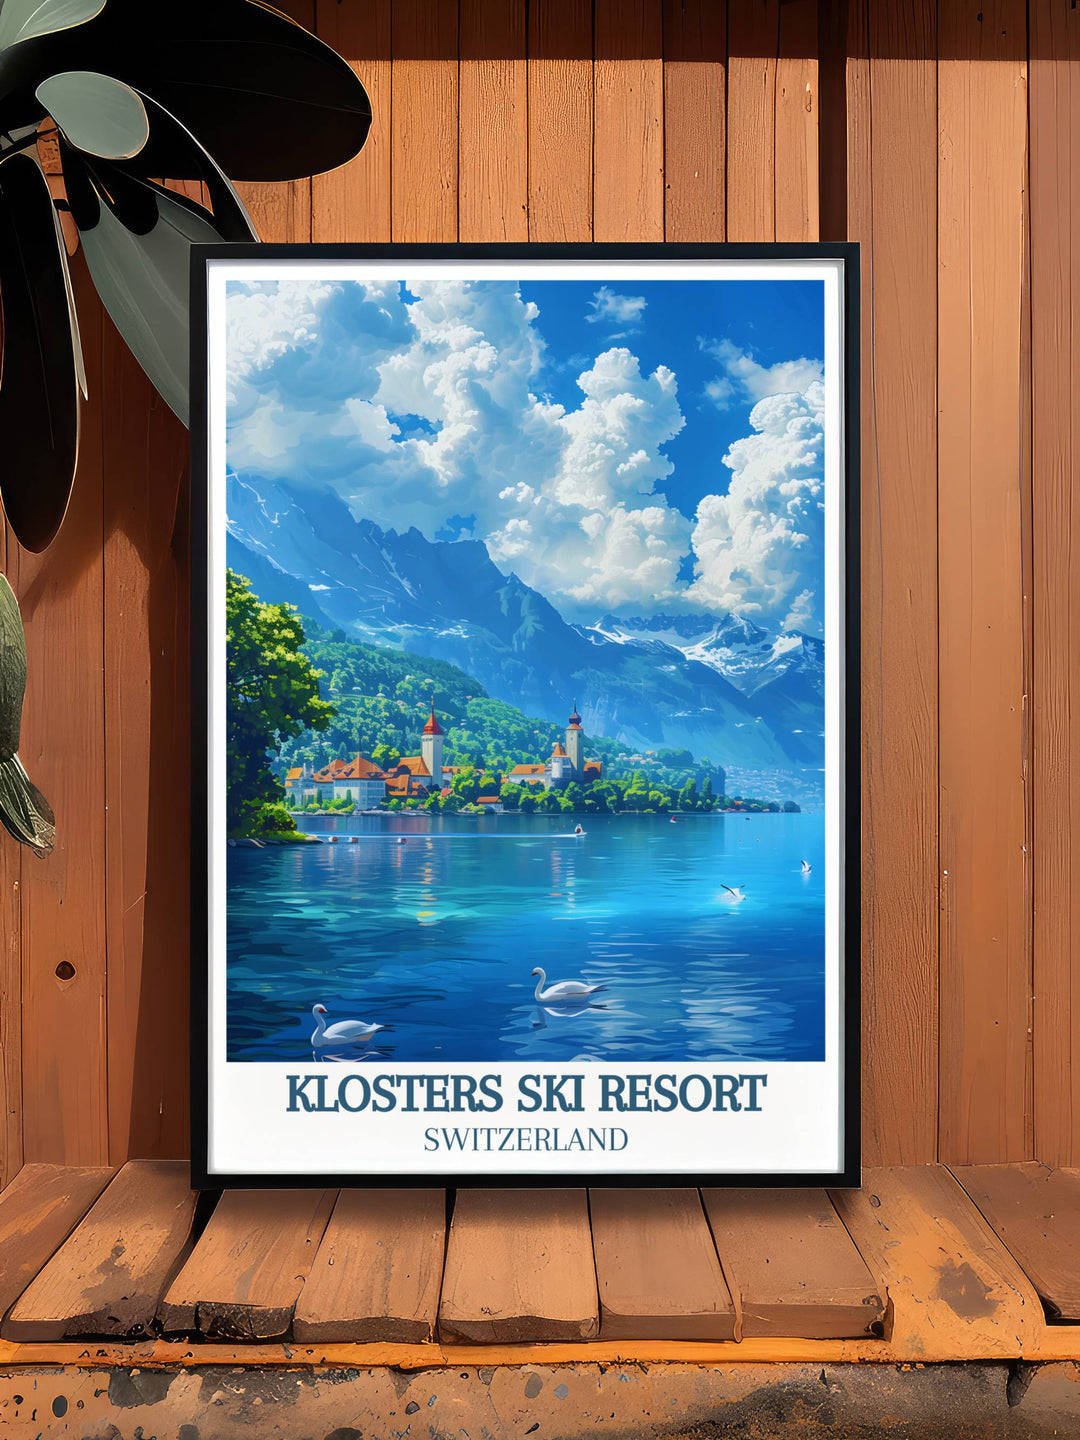 Enhance your decor with our Lake Geneva poster showcasing the lakes serene beauty. This travel print is a wonderful way to bring the calm and elegance of Lake Geneva into your home. Great for creating a peaceful and stylish atmosphere